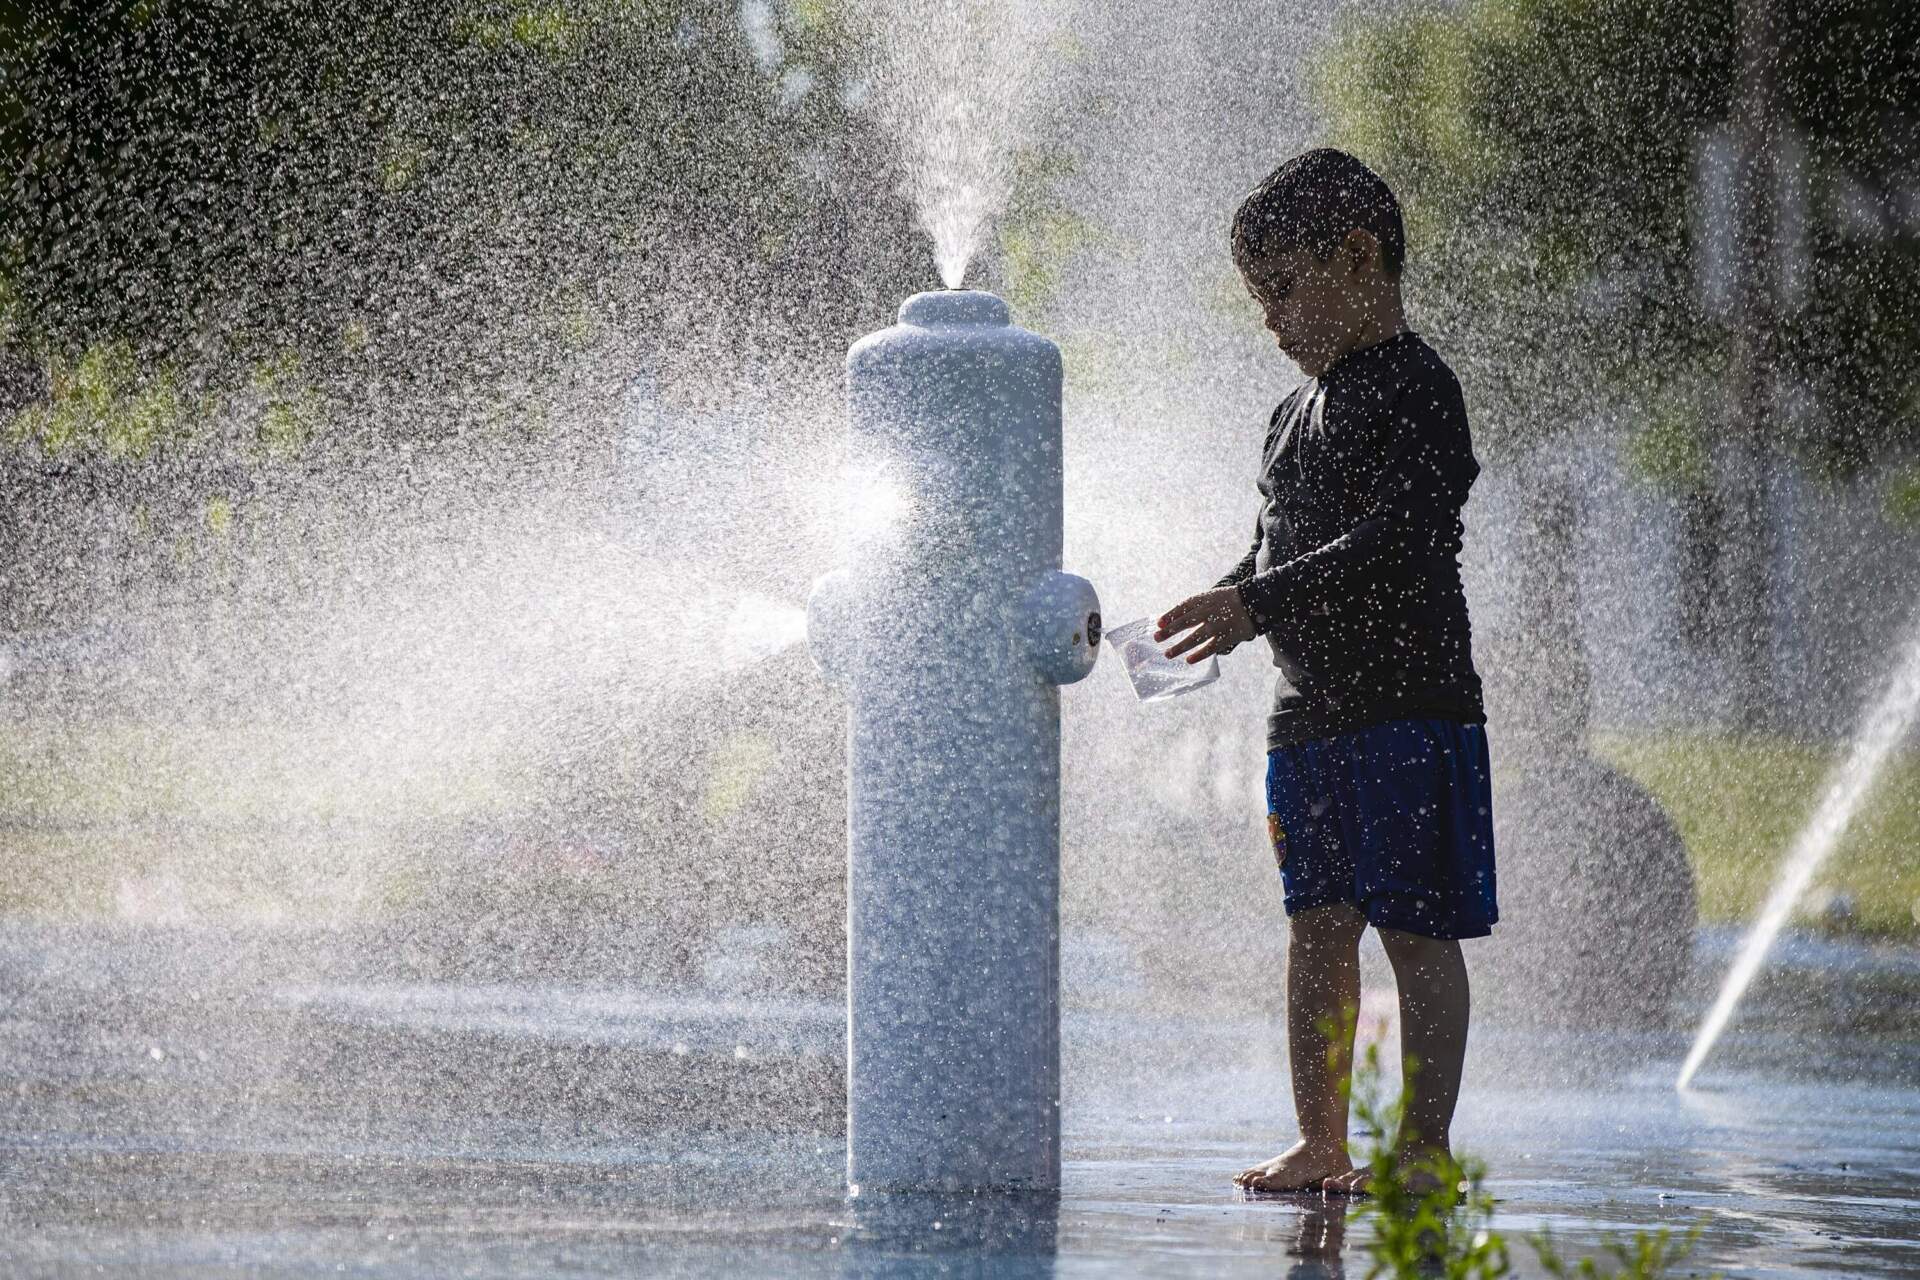 During a hot day in 2019, families kept cool in the spray pad at Ronan Park. (Jesse Costa/WBUR)